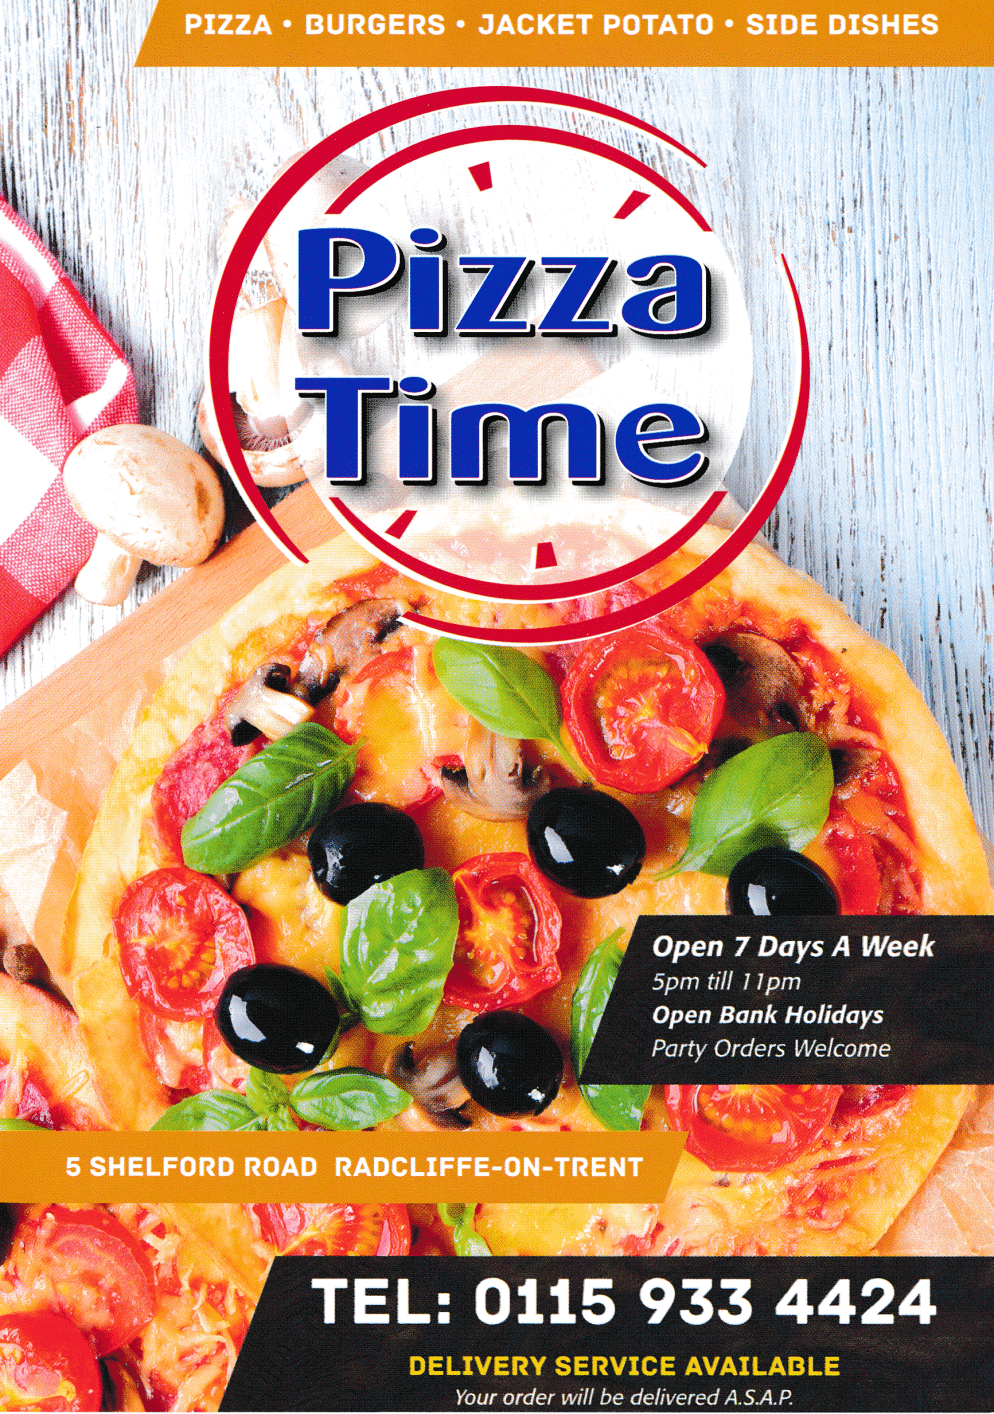 Menu for Pizza Time pizza and pasta takeaway in Radcliffe-On-Trent near Nottingham